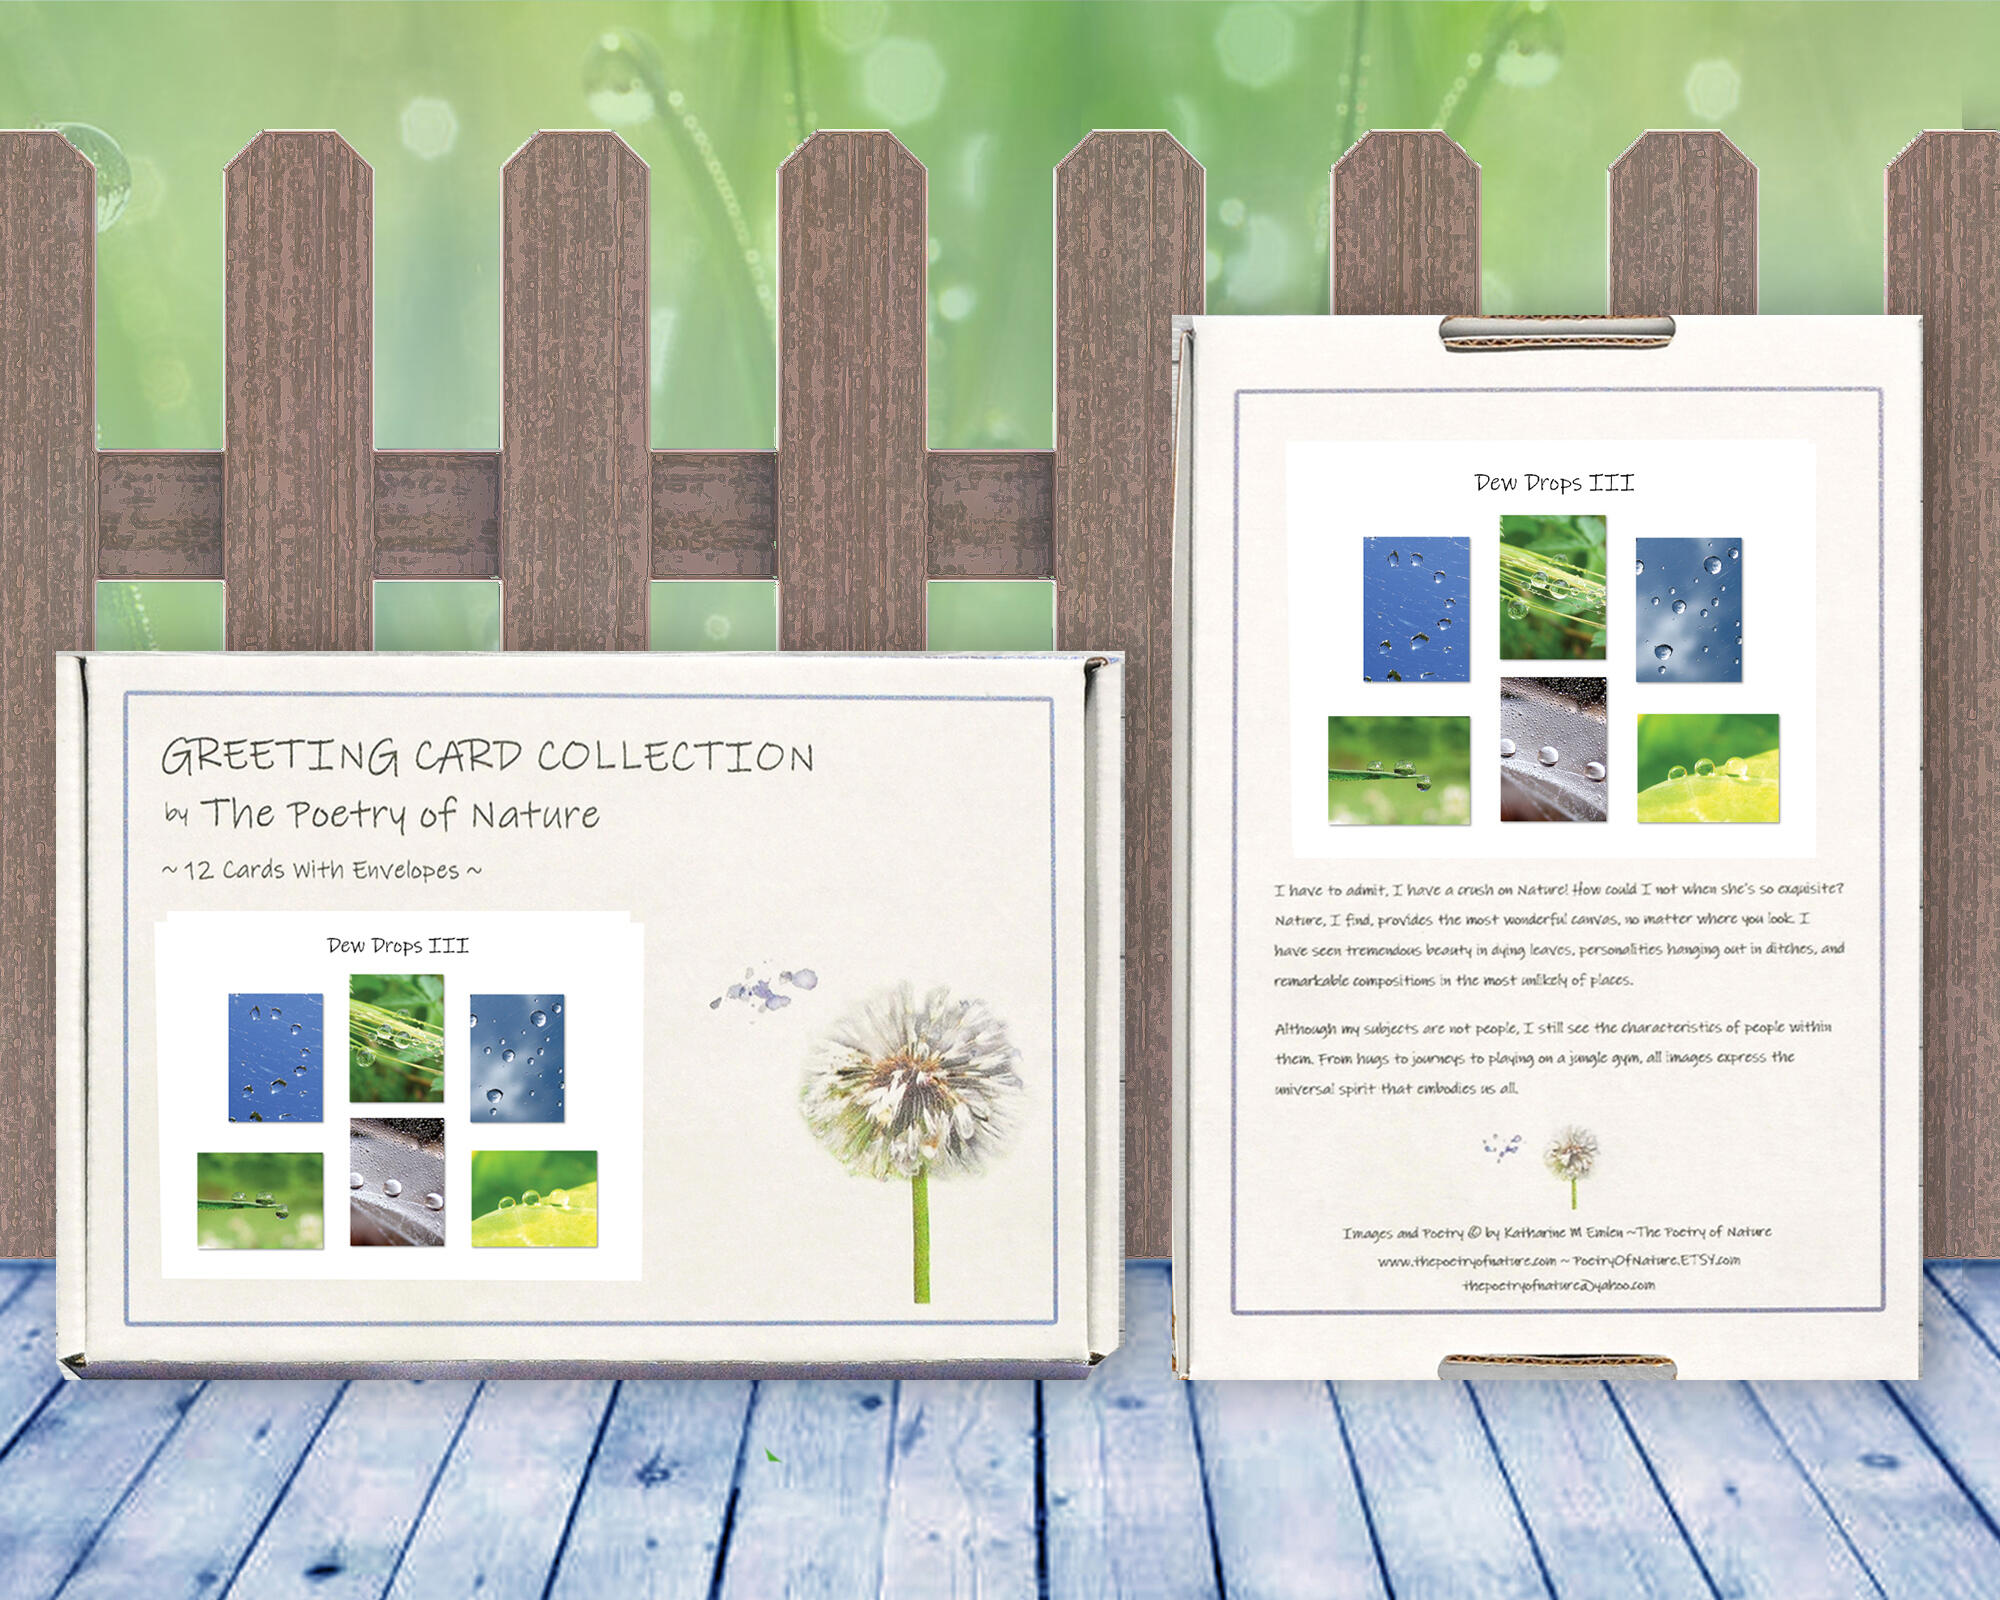 Dew Drops III - Greeting Card Collection by The Poetry of Nature